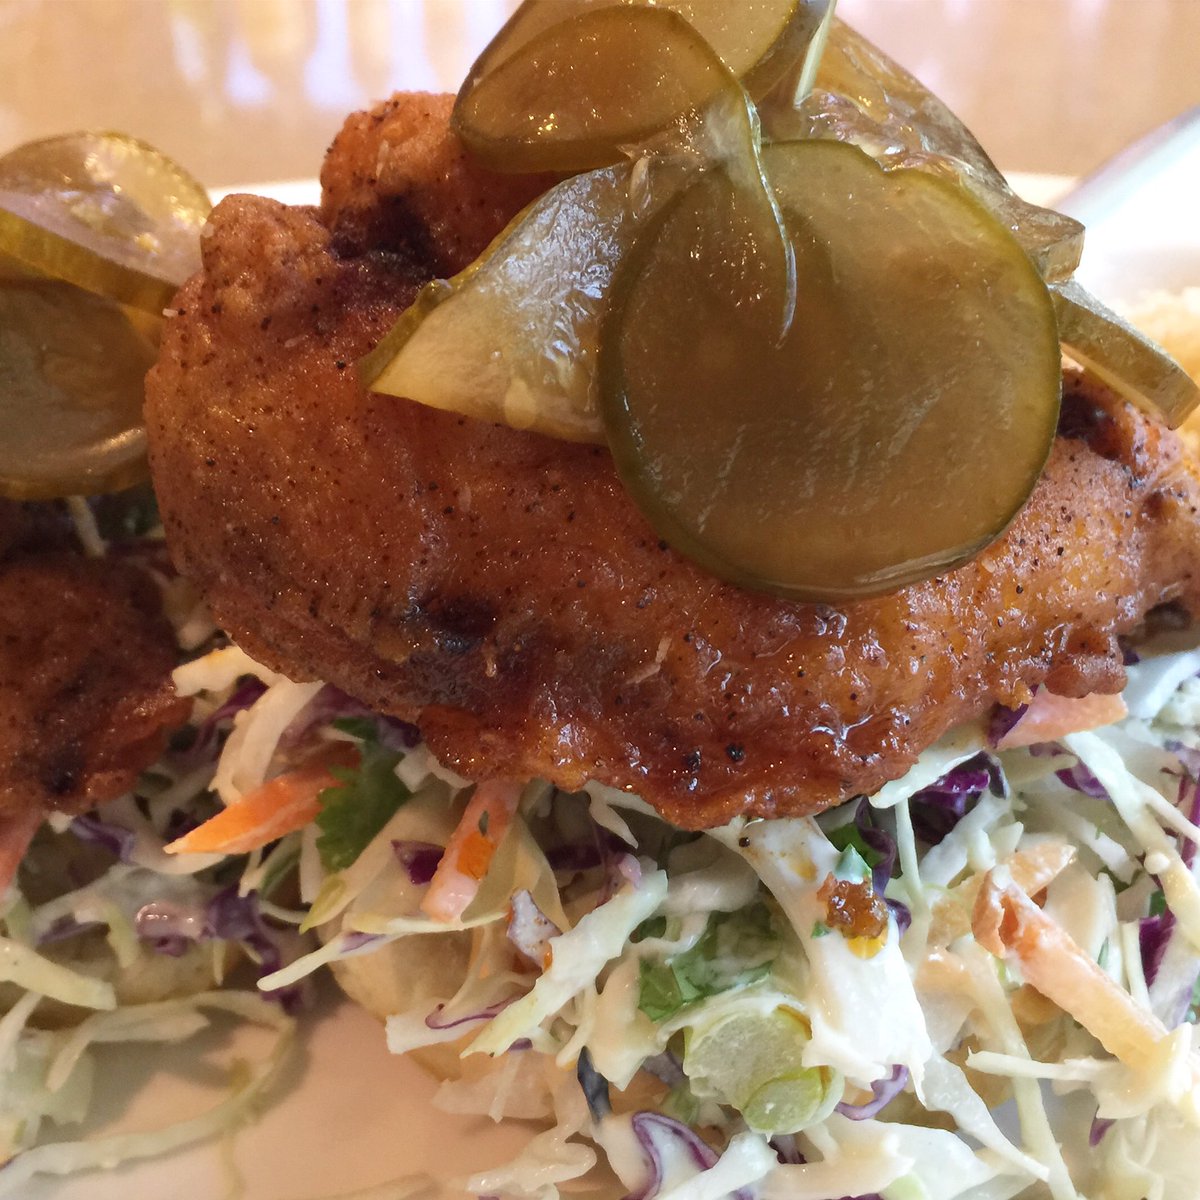 What did I do today? I went to @chwinery met up with a friend and ate this sandwich: Southern Hot Chicken: Open-Face Buttermilk Biscuit, Creamy Bleu Cheese Slaw, Bread and Butter Pickles, Classic Mac and Cheese! Absolutely amazing #microinfluencer #tampa #floridablogger #florida